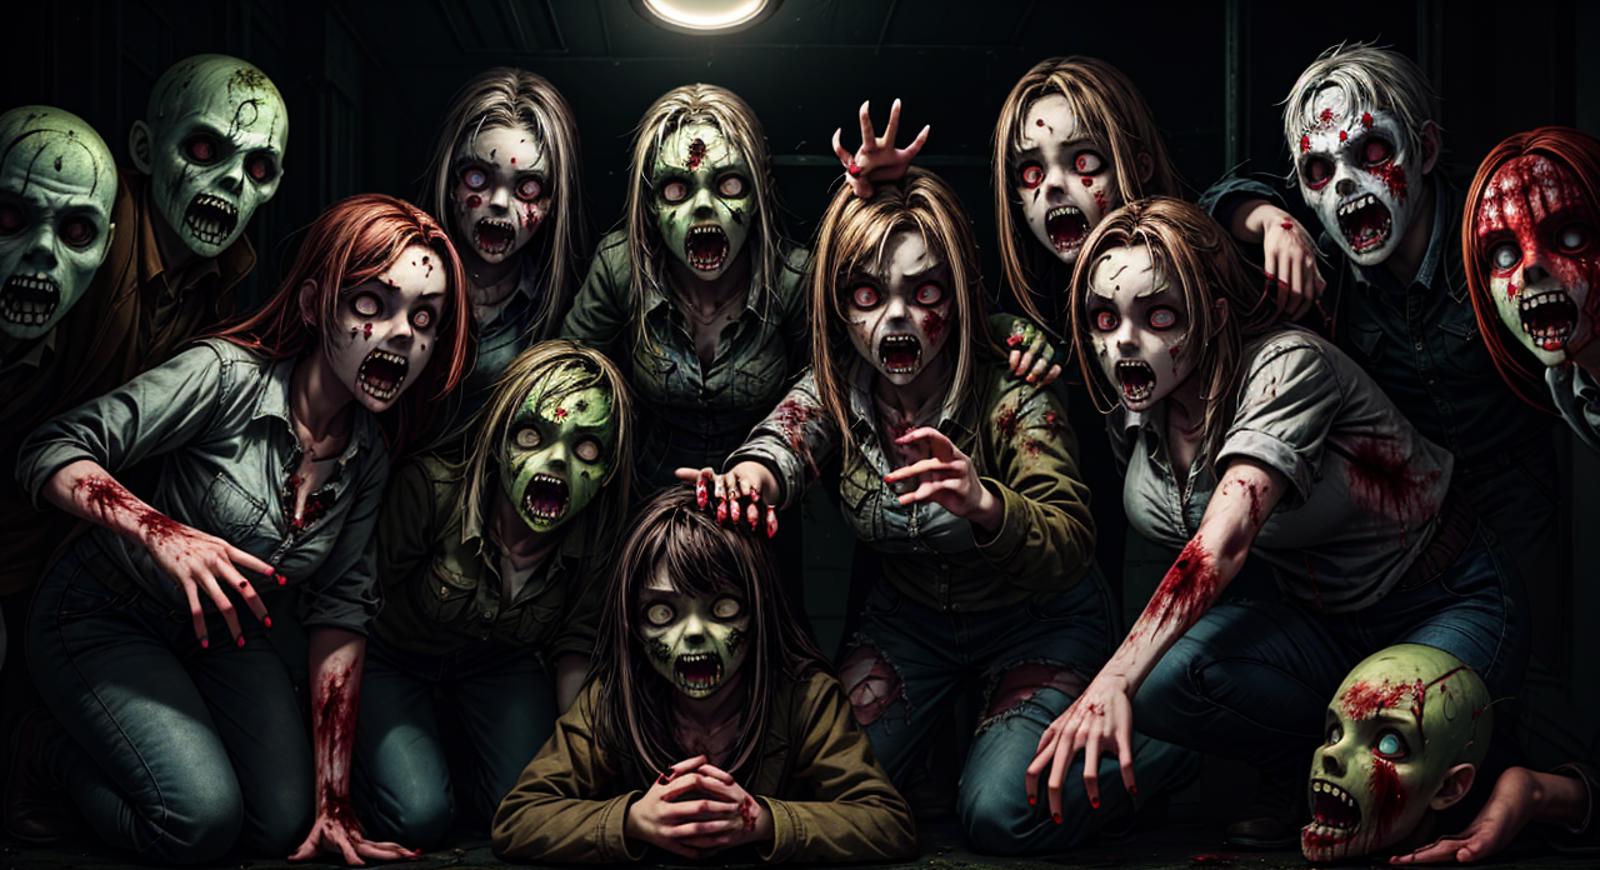 A group of zombies surrounding a person in a dark room.